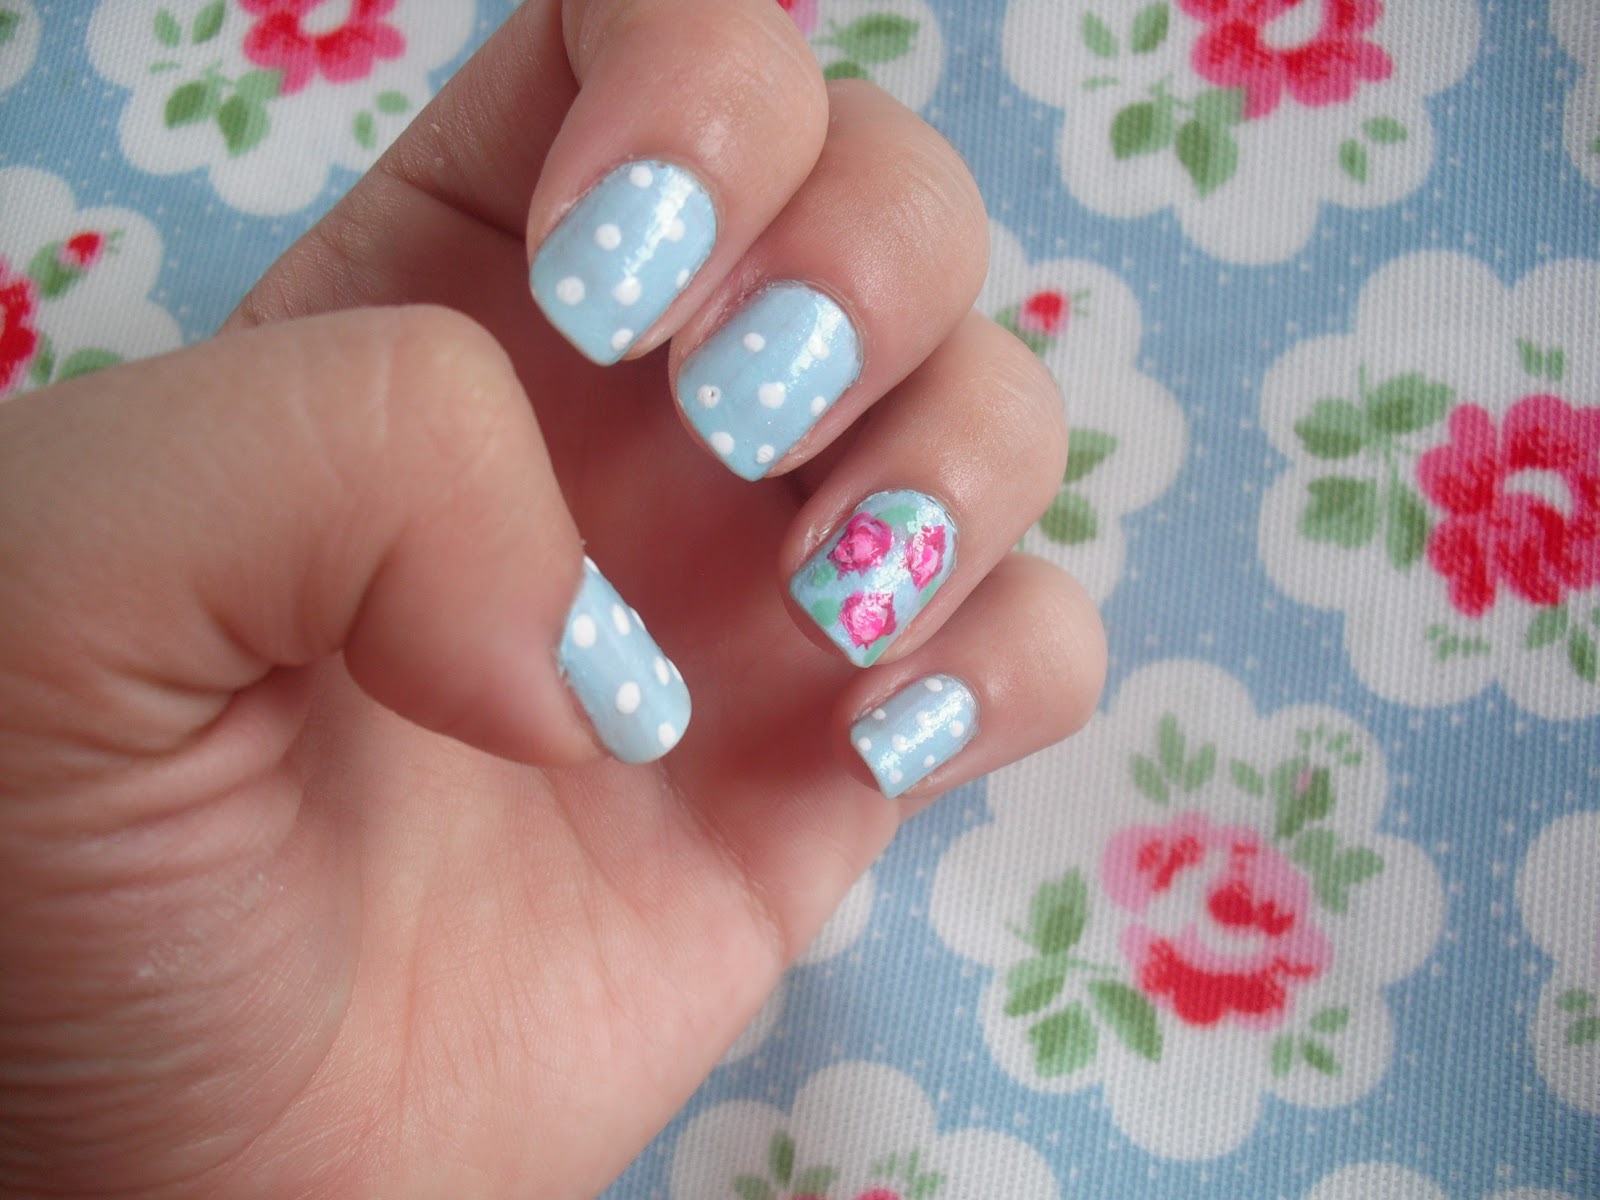 6. "Cath Kidston Inspired Nail Design Tutorial" - wide 6